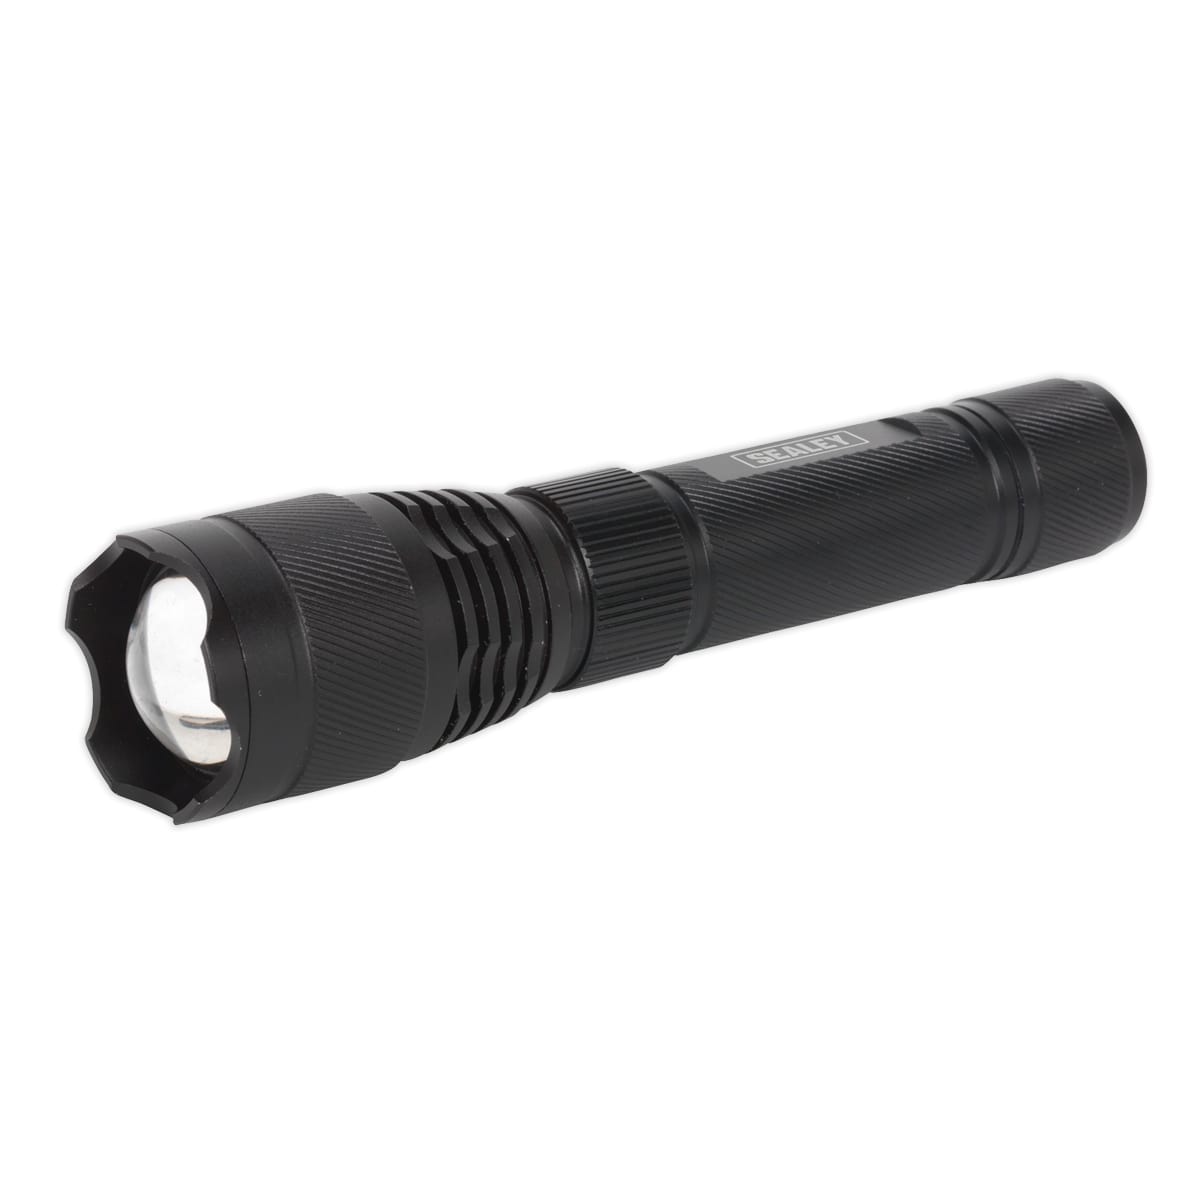 Sealey LED449 Aluminium Rechargeable Torch 720Lm